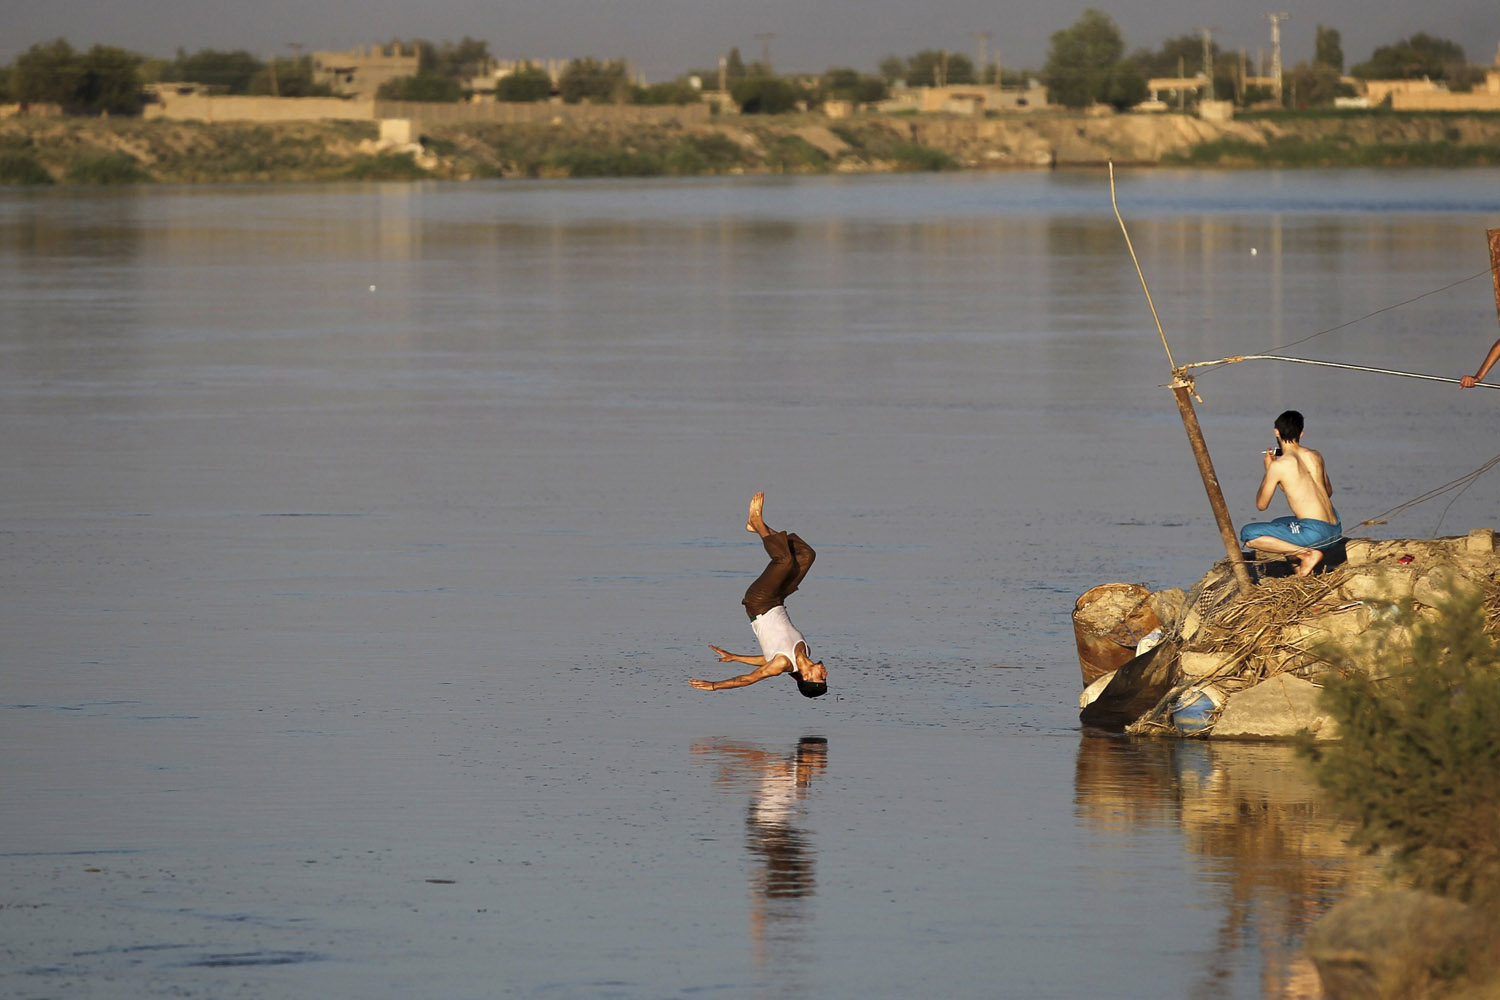 A member of the Free Syrian Army dives into the Euphrates river in Deir al-Zor